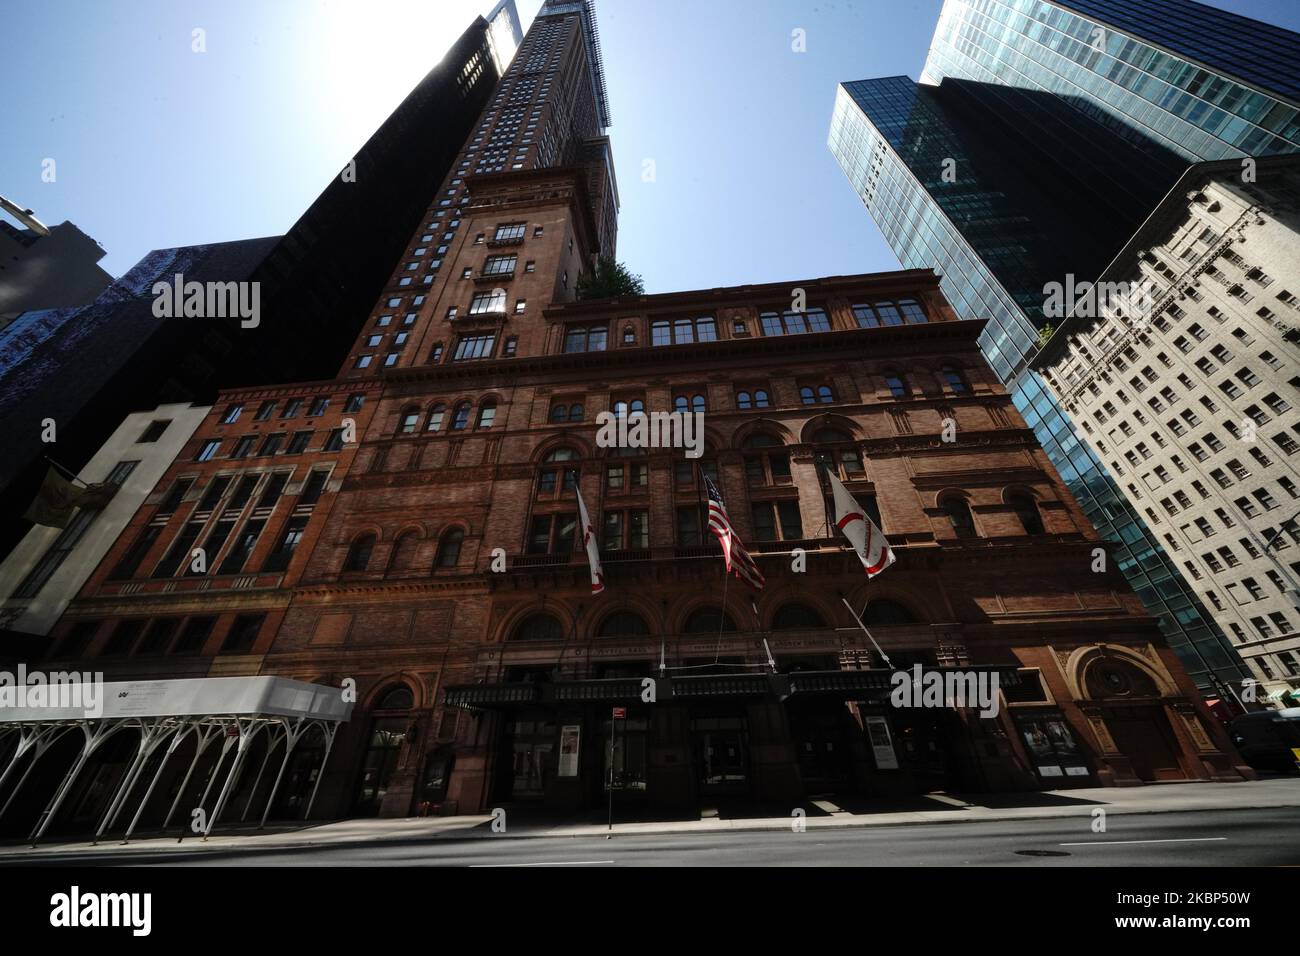 A view of the Carnegie Hall during the coronavirus pandemic on May 20, 2020 in New York City. COVID-19 has spread to most countries around the world, claiming over 316,000 lives with over 4.8 million infections reported. (Photo by John Nacion/NurPhoto) Stock Photo